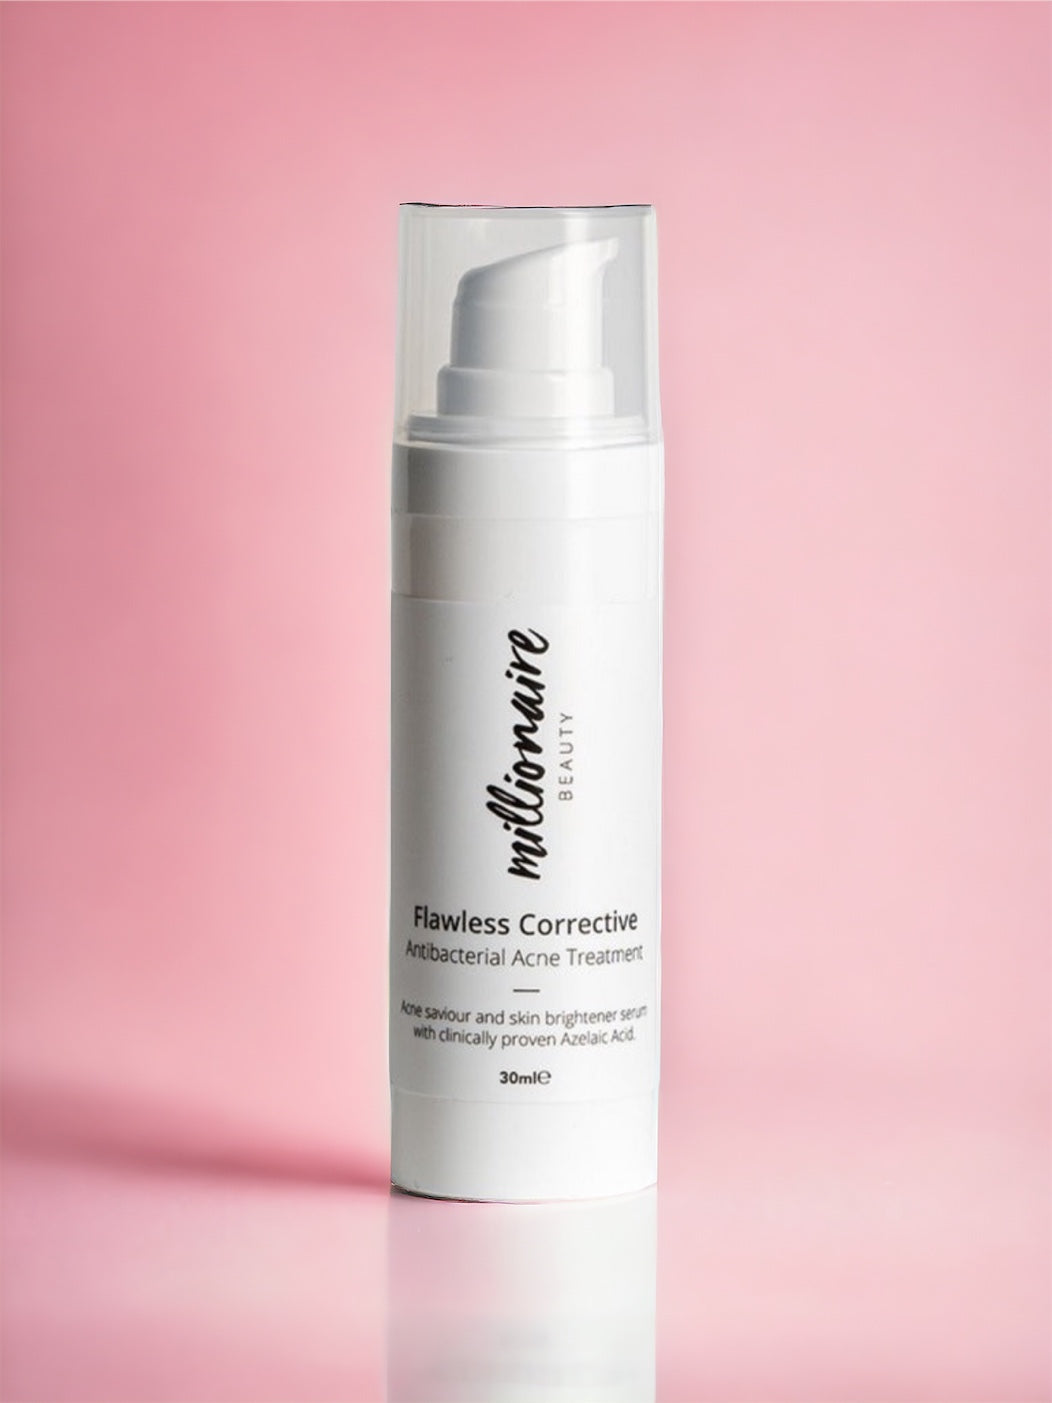 Flawless Corrective - a spot, acne and skin redness serum